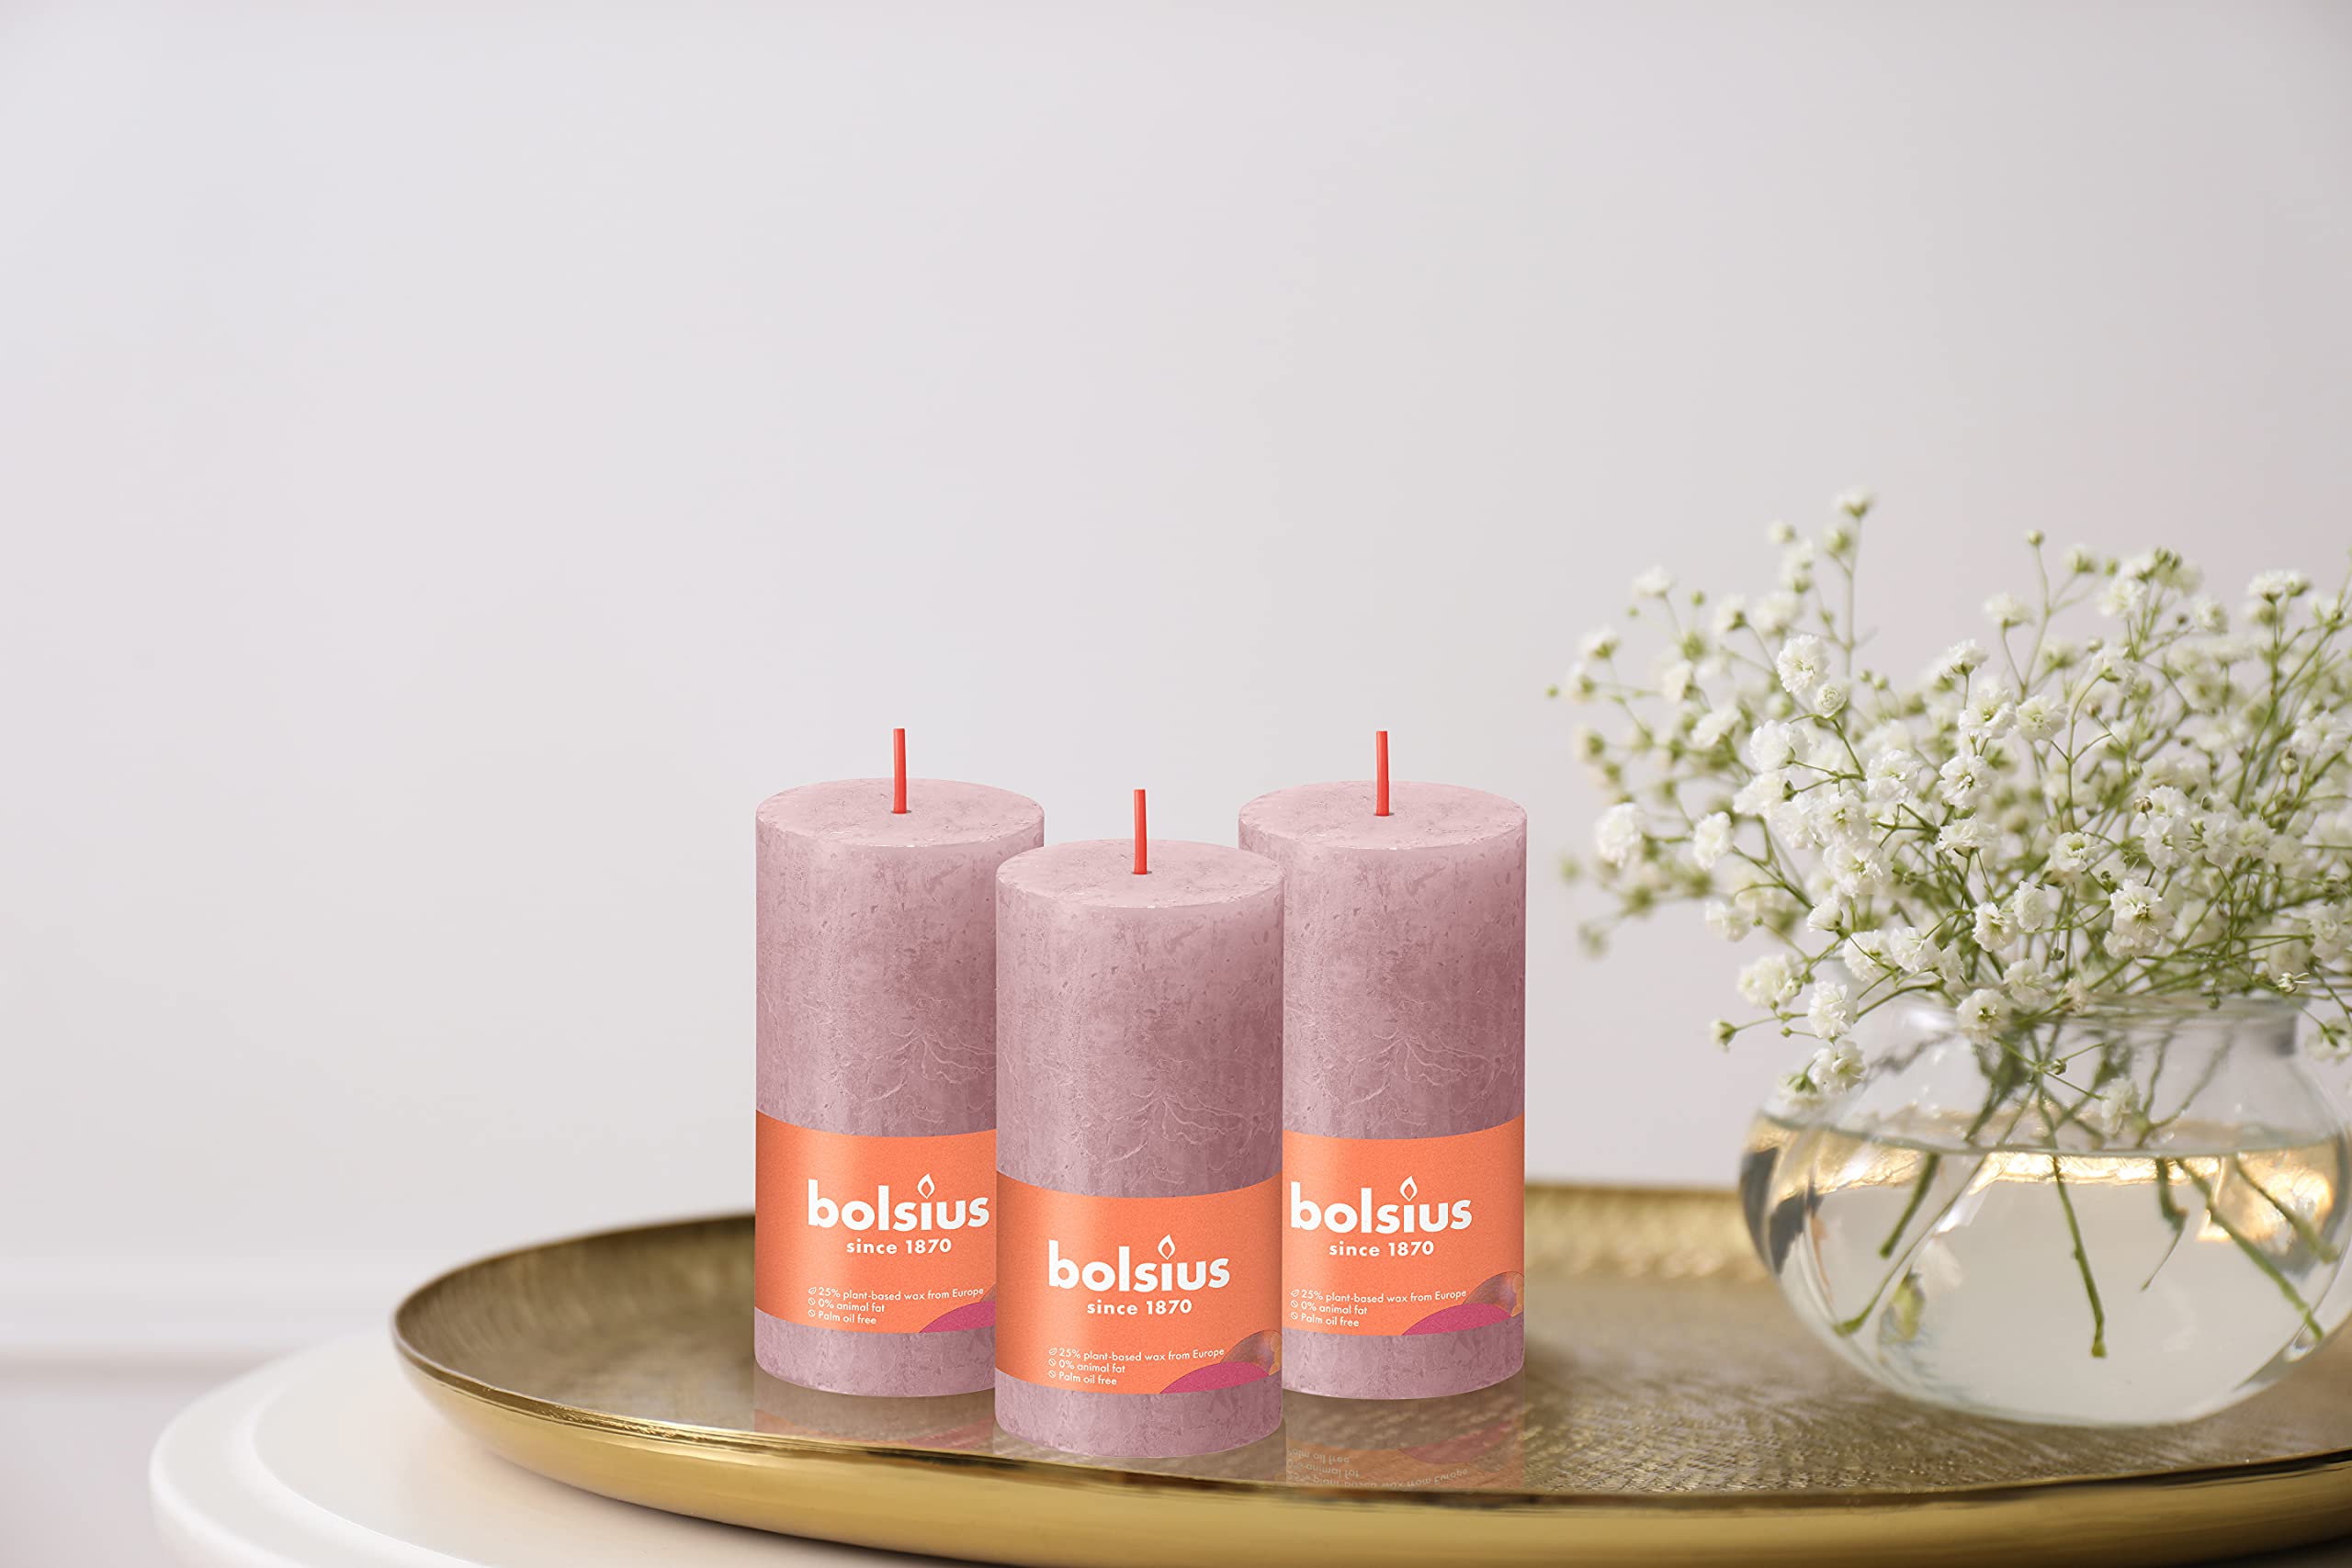 BOLSIUS 4 Pack Ash Rose Rustic Pillar Candles - 2 X 4 Inches - Premium European Quality - Includes Natural Plant-Based Wax - Unscented Dripless Smokeless 30 Hour Party D�cor and Wedding Candles  - Like New